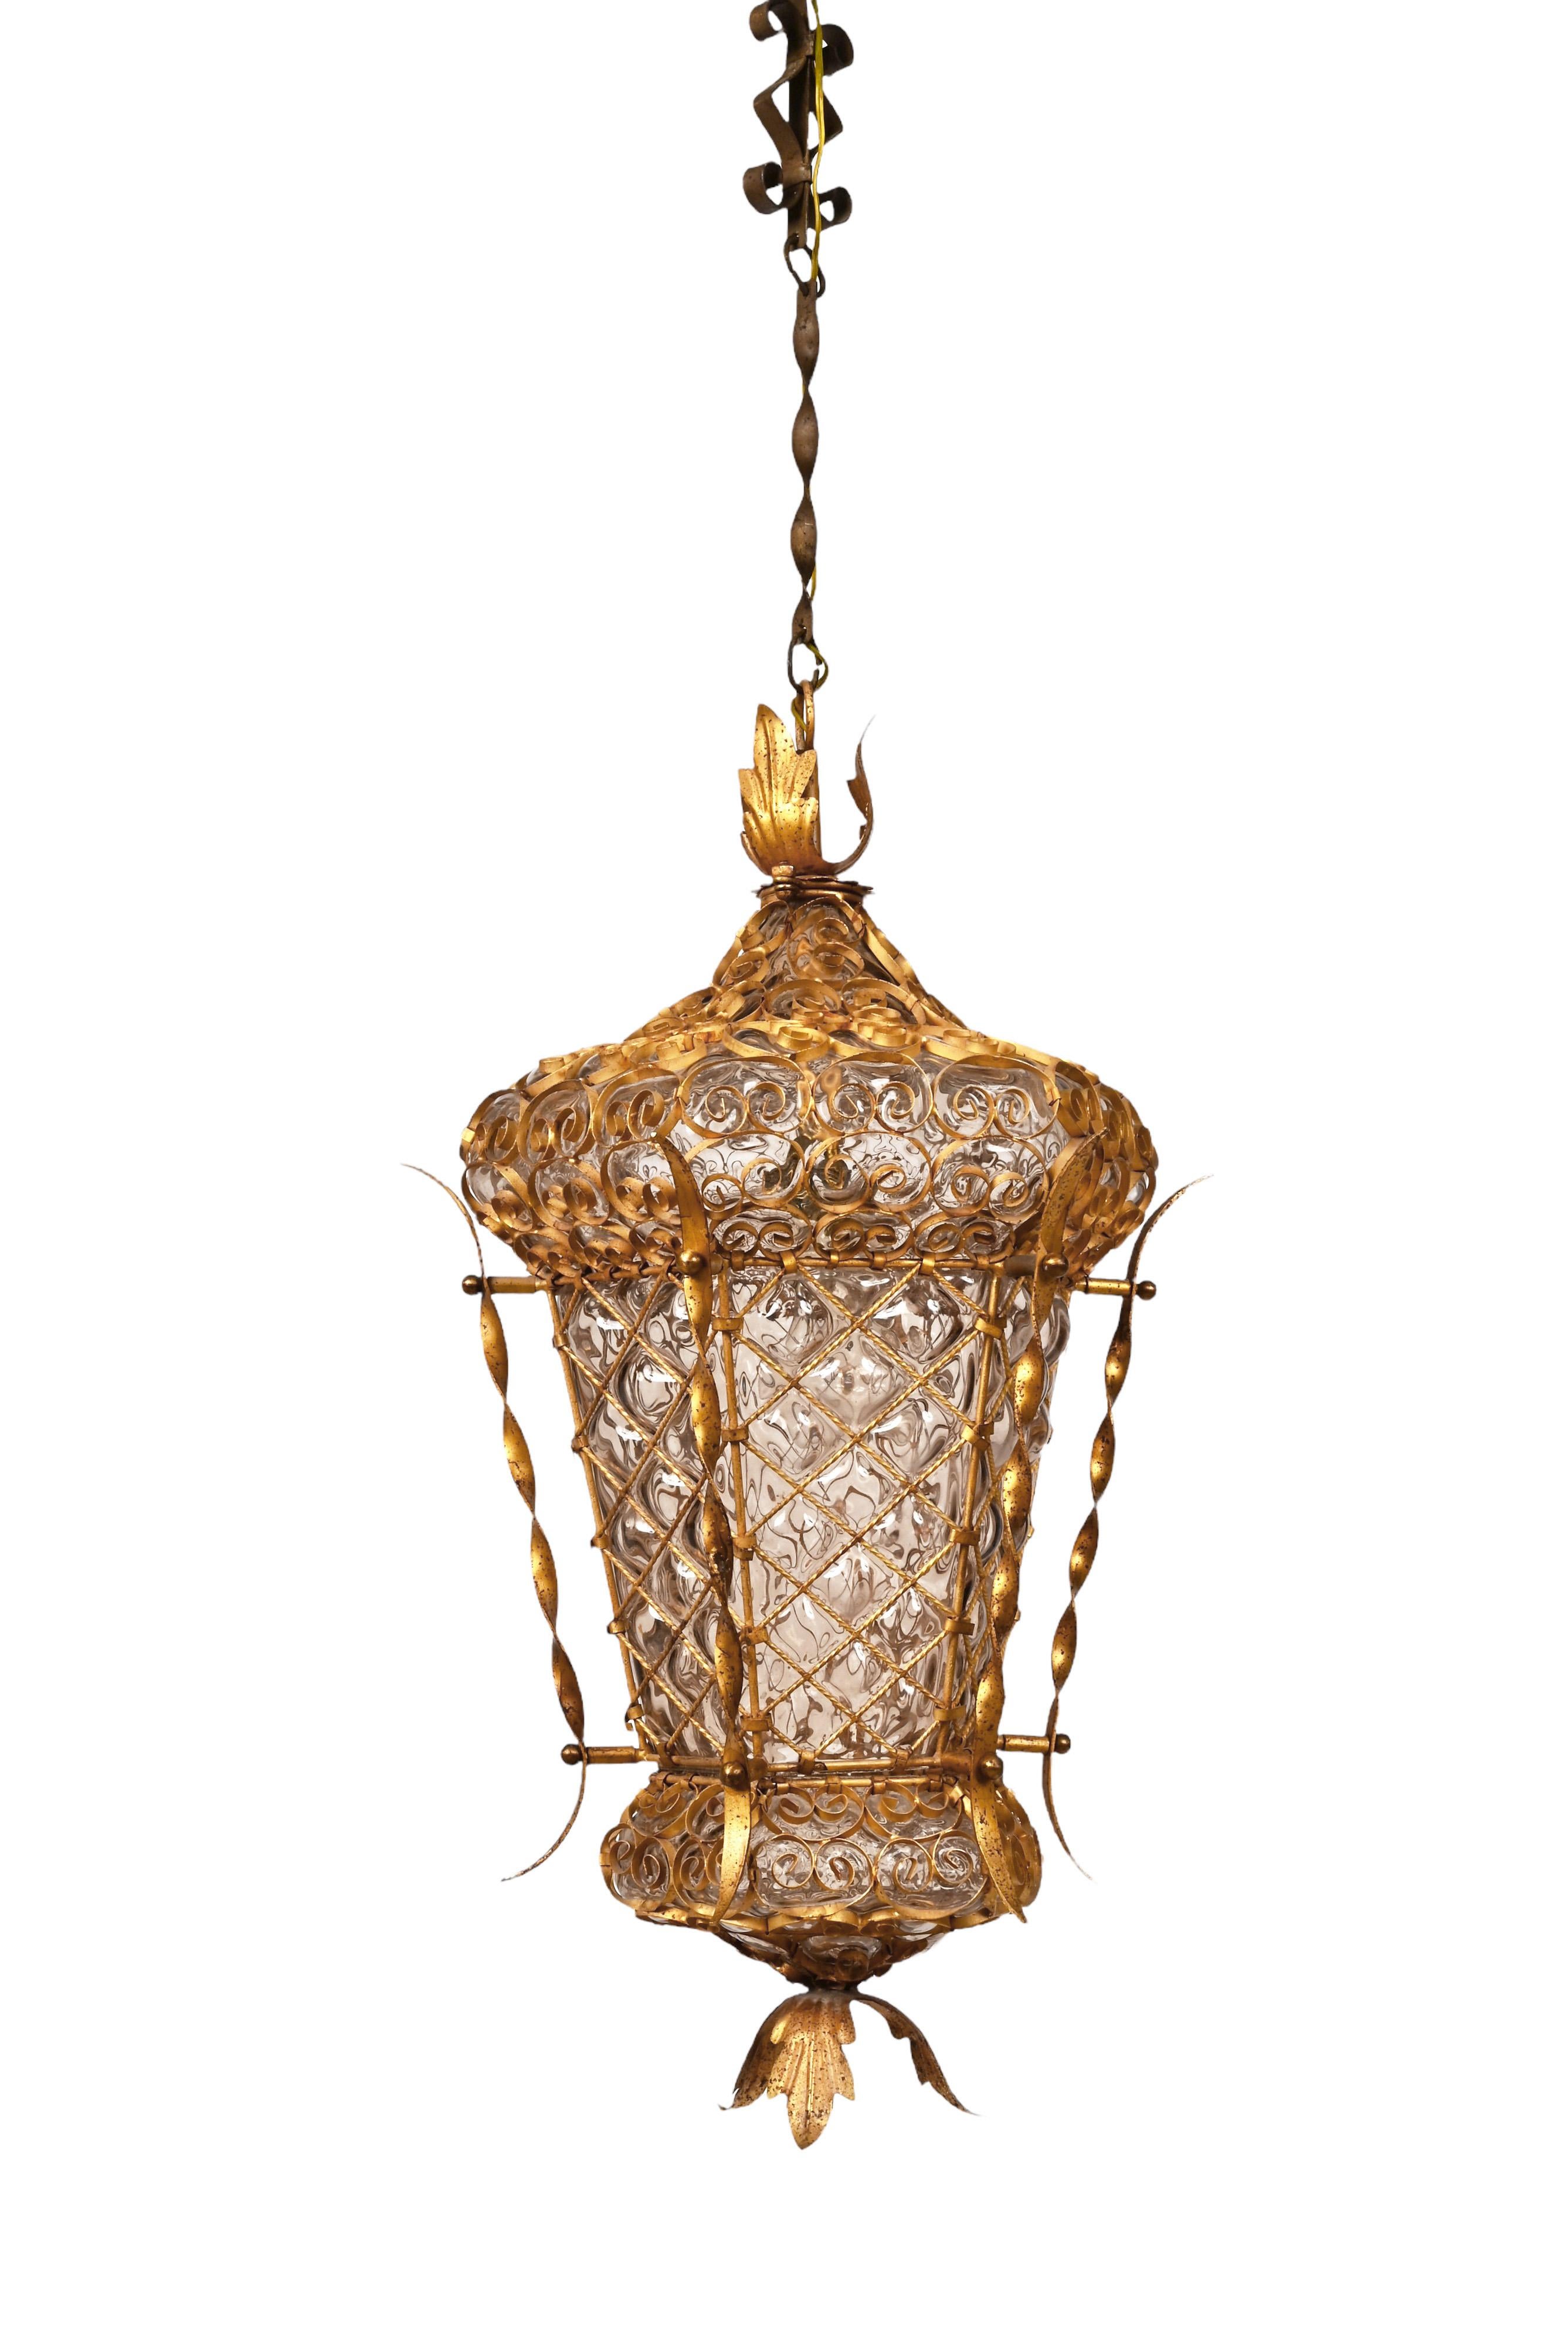 Midcentury Venetian Mouth Blown Glass in Gold Painted Metal Frame Lantern, 1940s For Sale 5